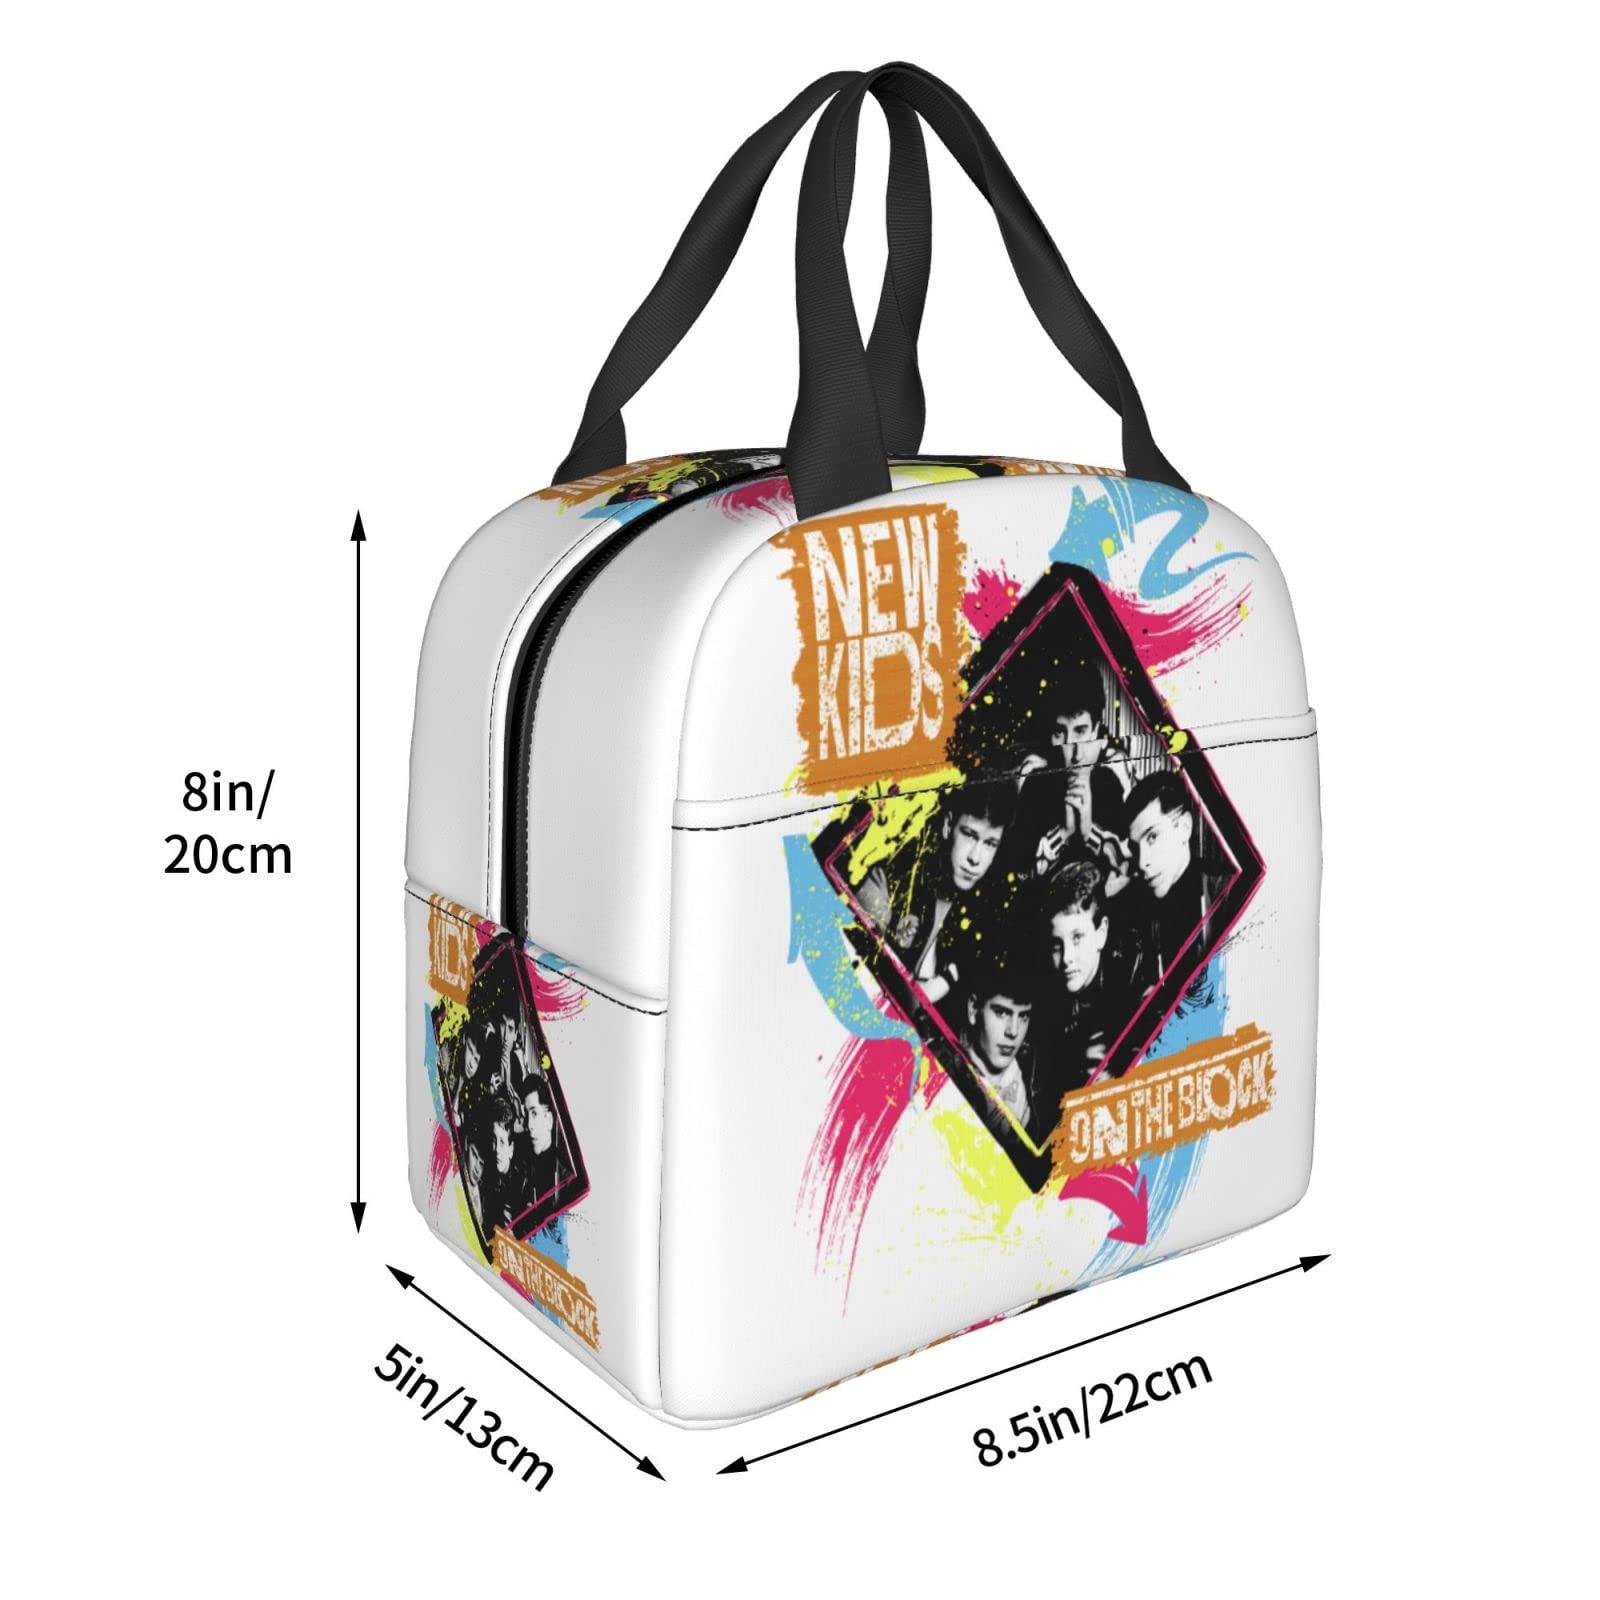 New-Kids On The-Block Portable Lunch Bag Thermal Insulation Tote Bag